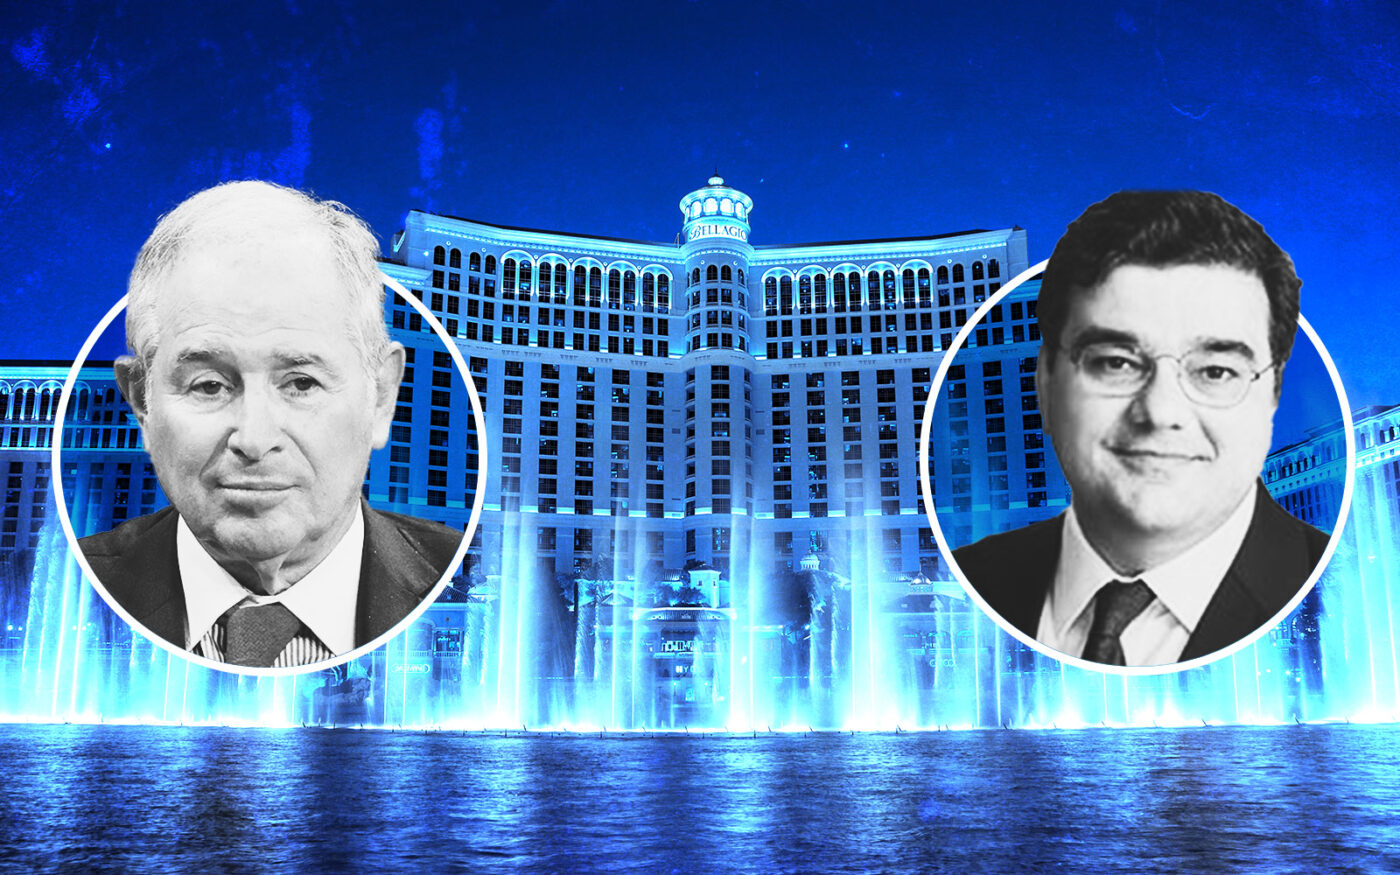 Bellagio land for sale? Blackstone may look to capitalize on Strip property, Casinos & Gaming